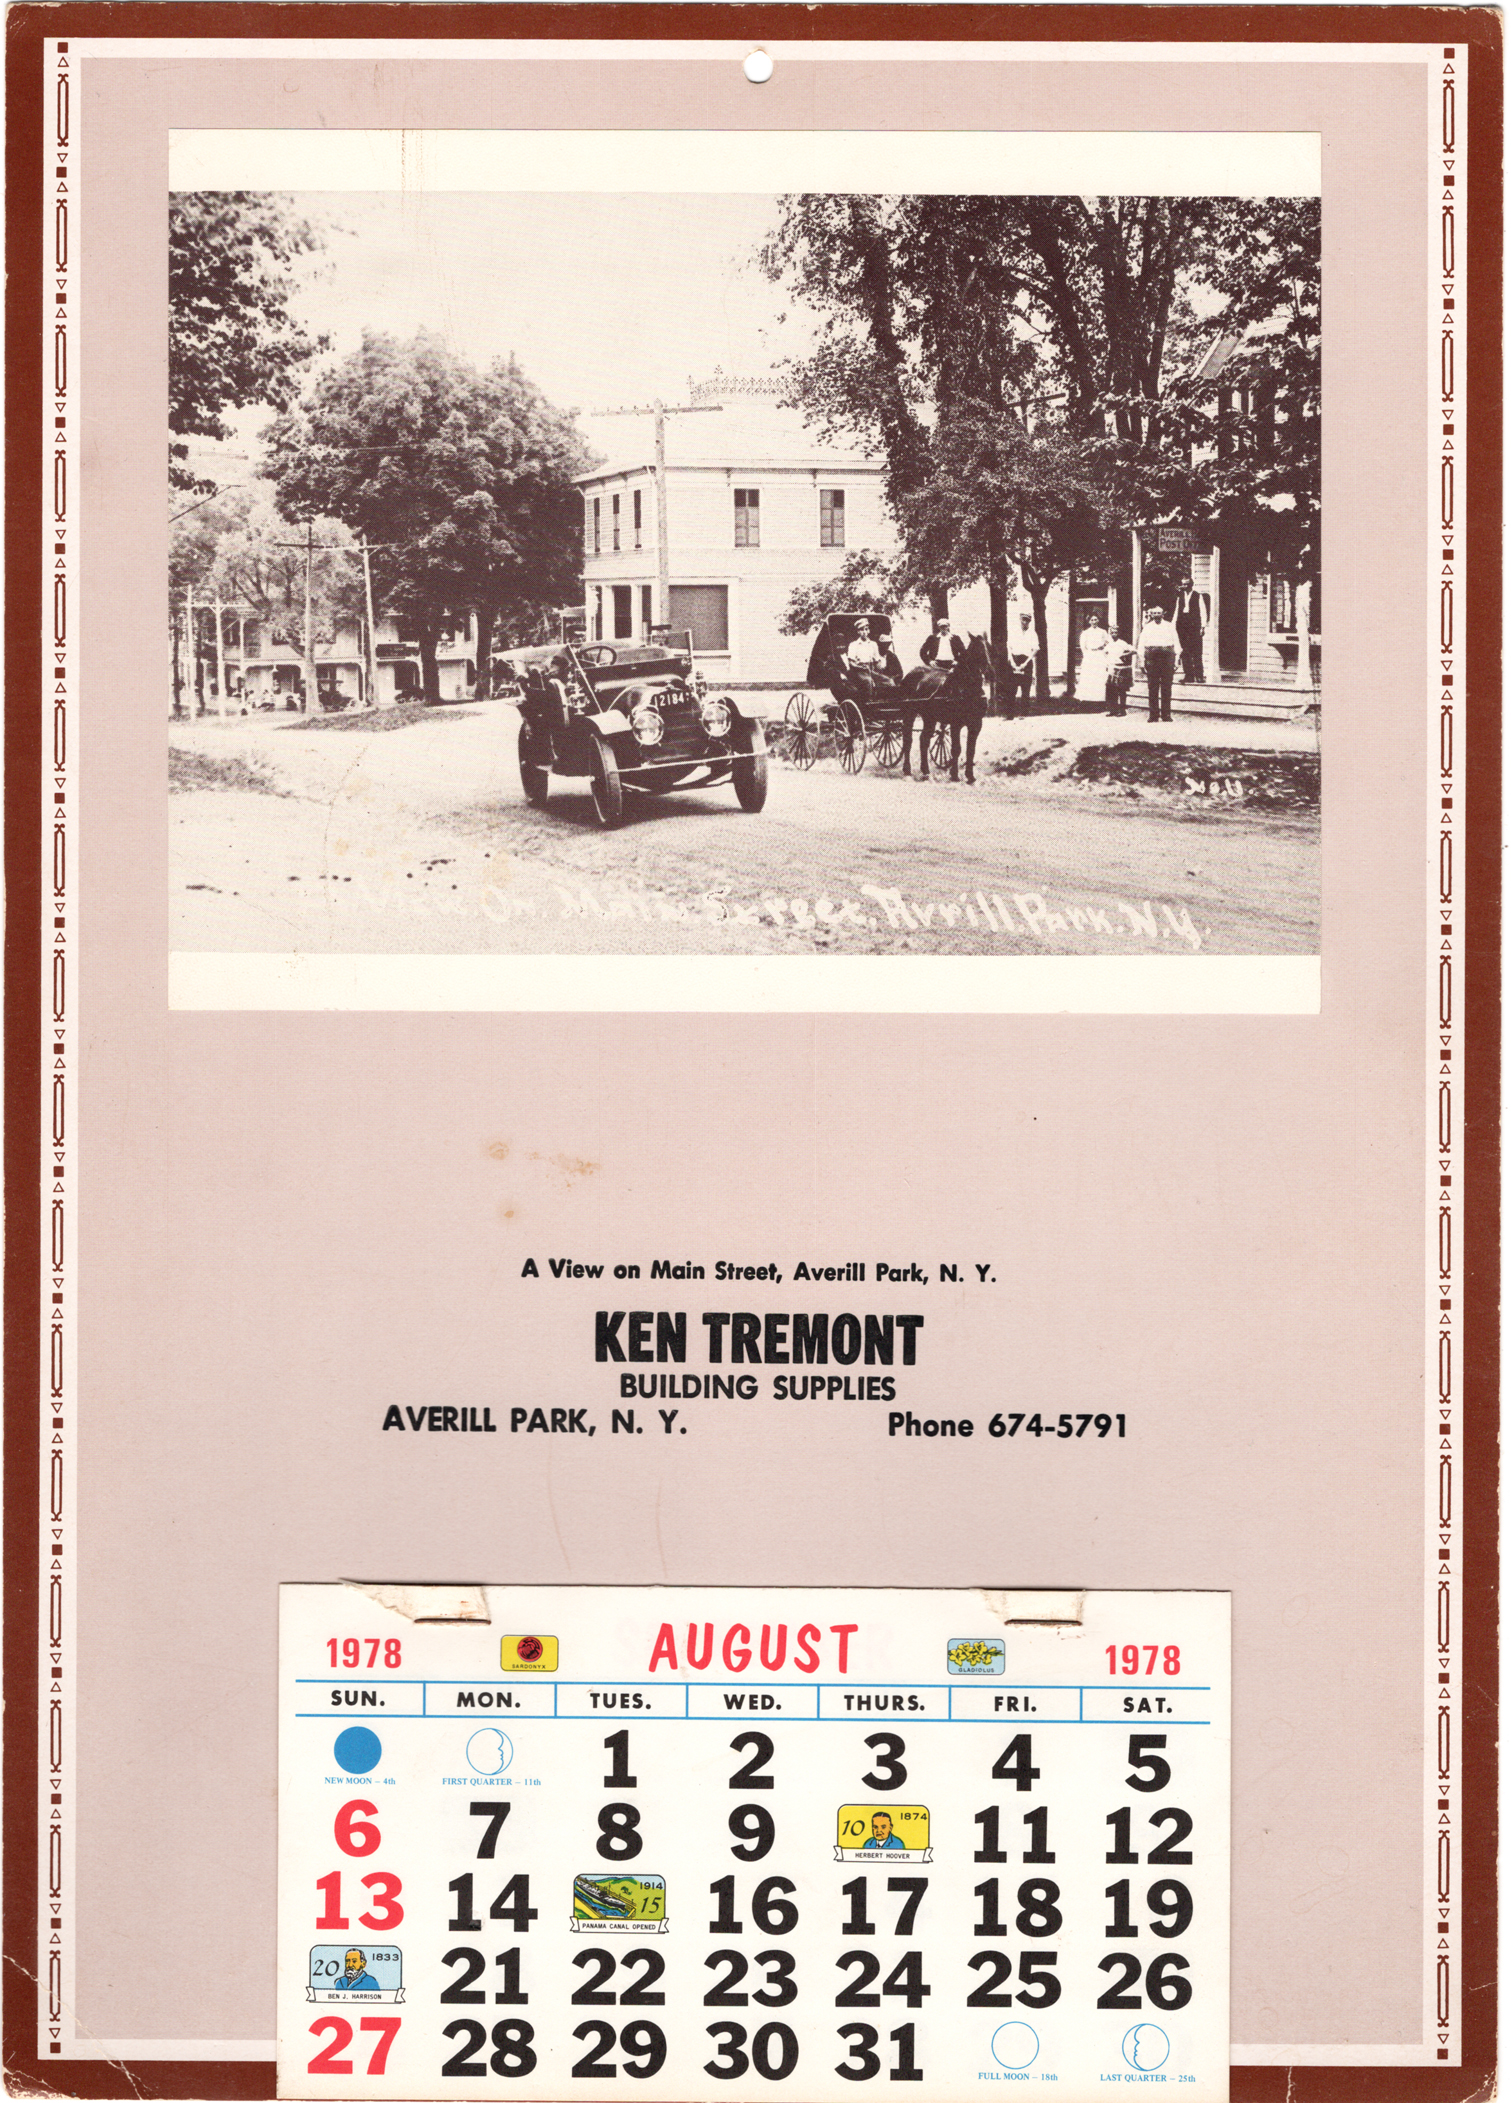 Tremont Lumber Company calendar from 1978.